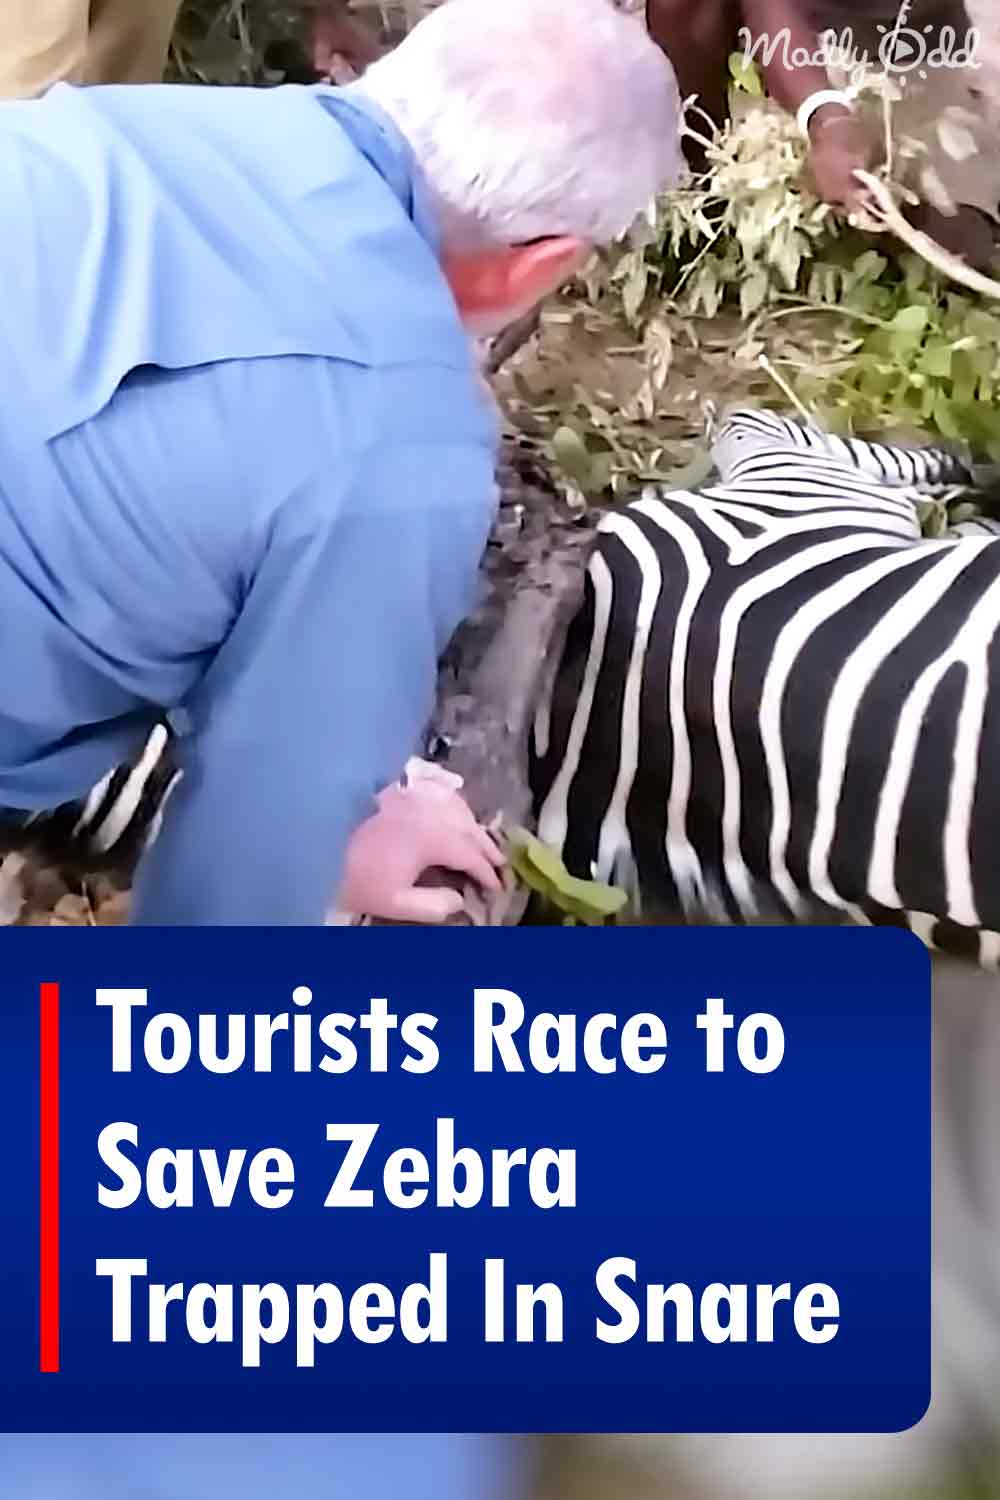 Tourists Race to Save Zebra Trapped In Snare